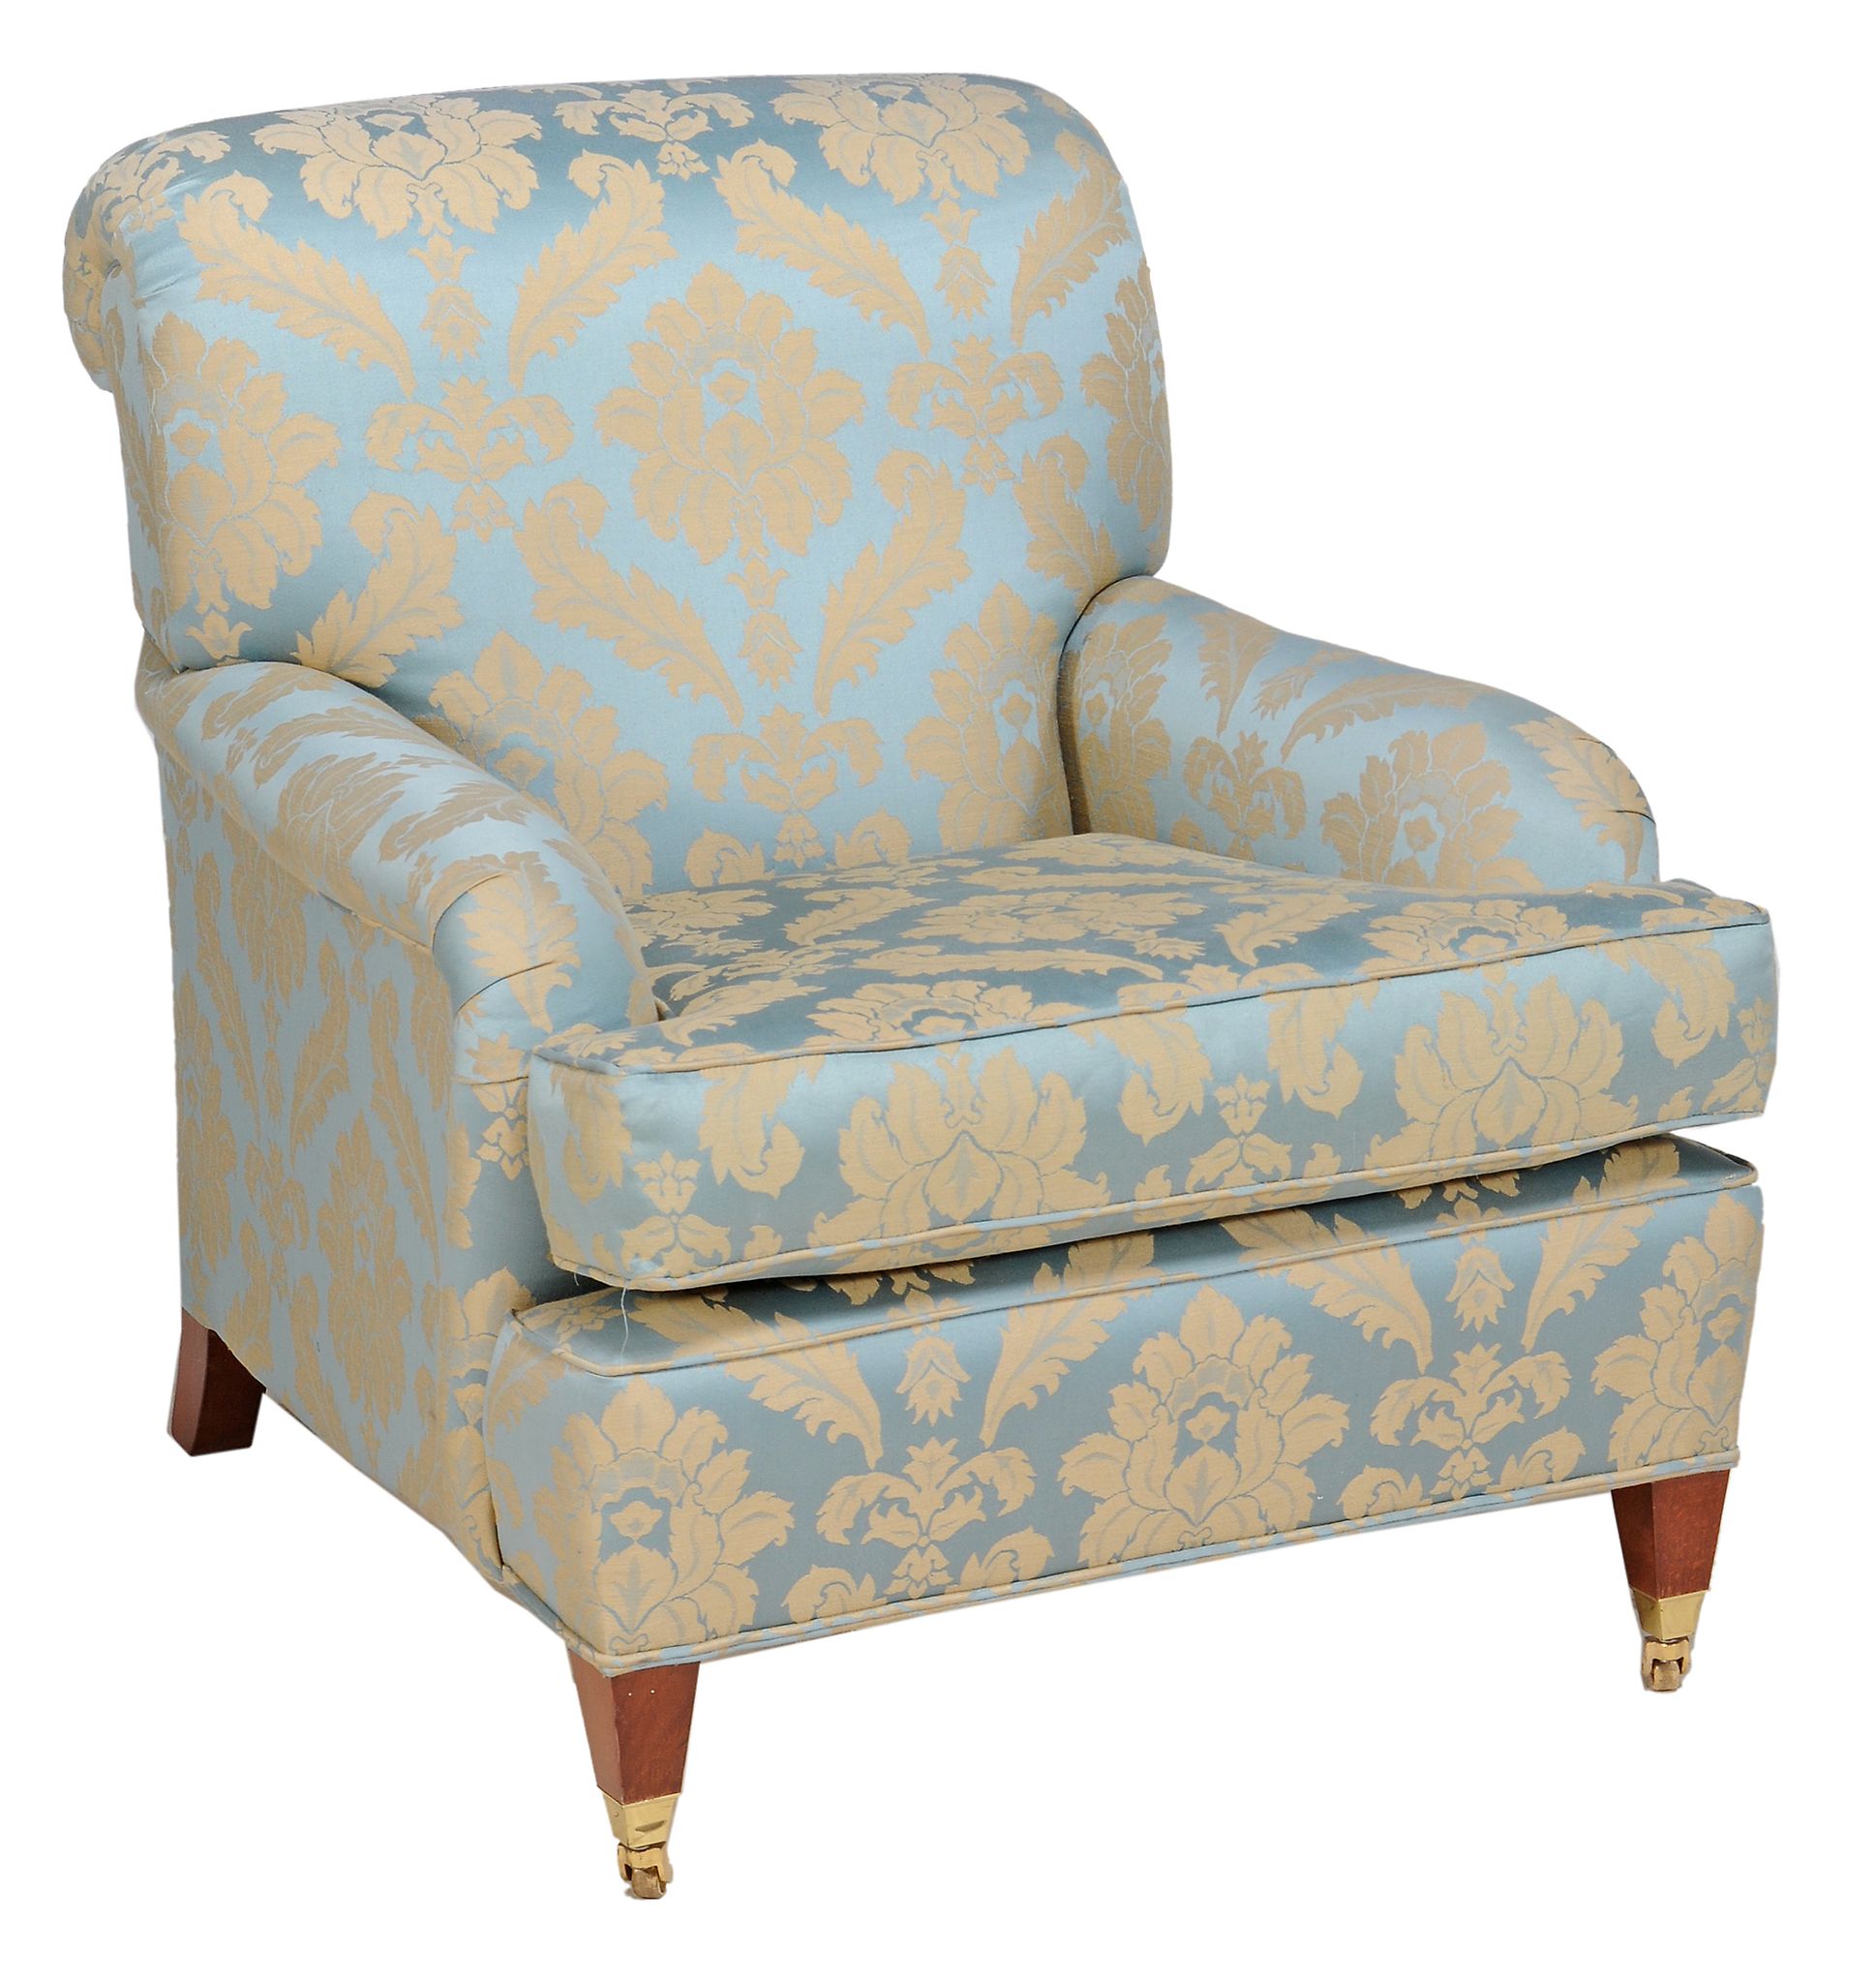 A mahogany and damask upholstered armchair in Victorian style , 20th century  A mahogany and